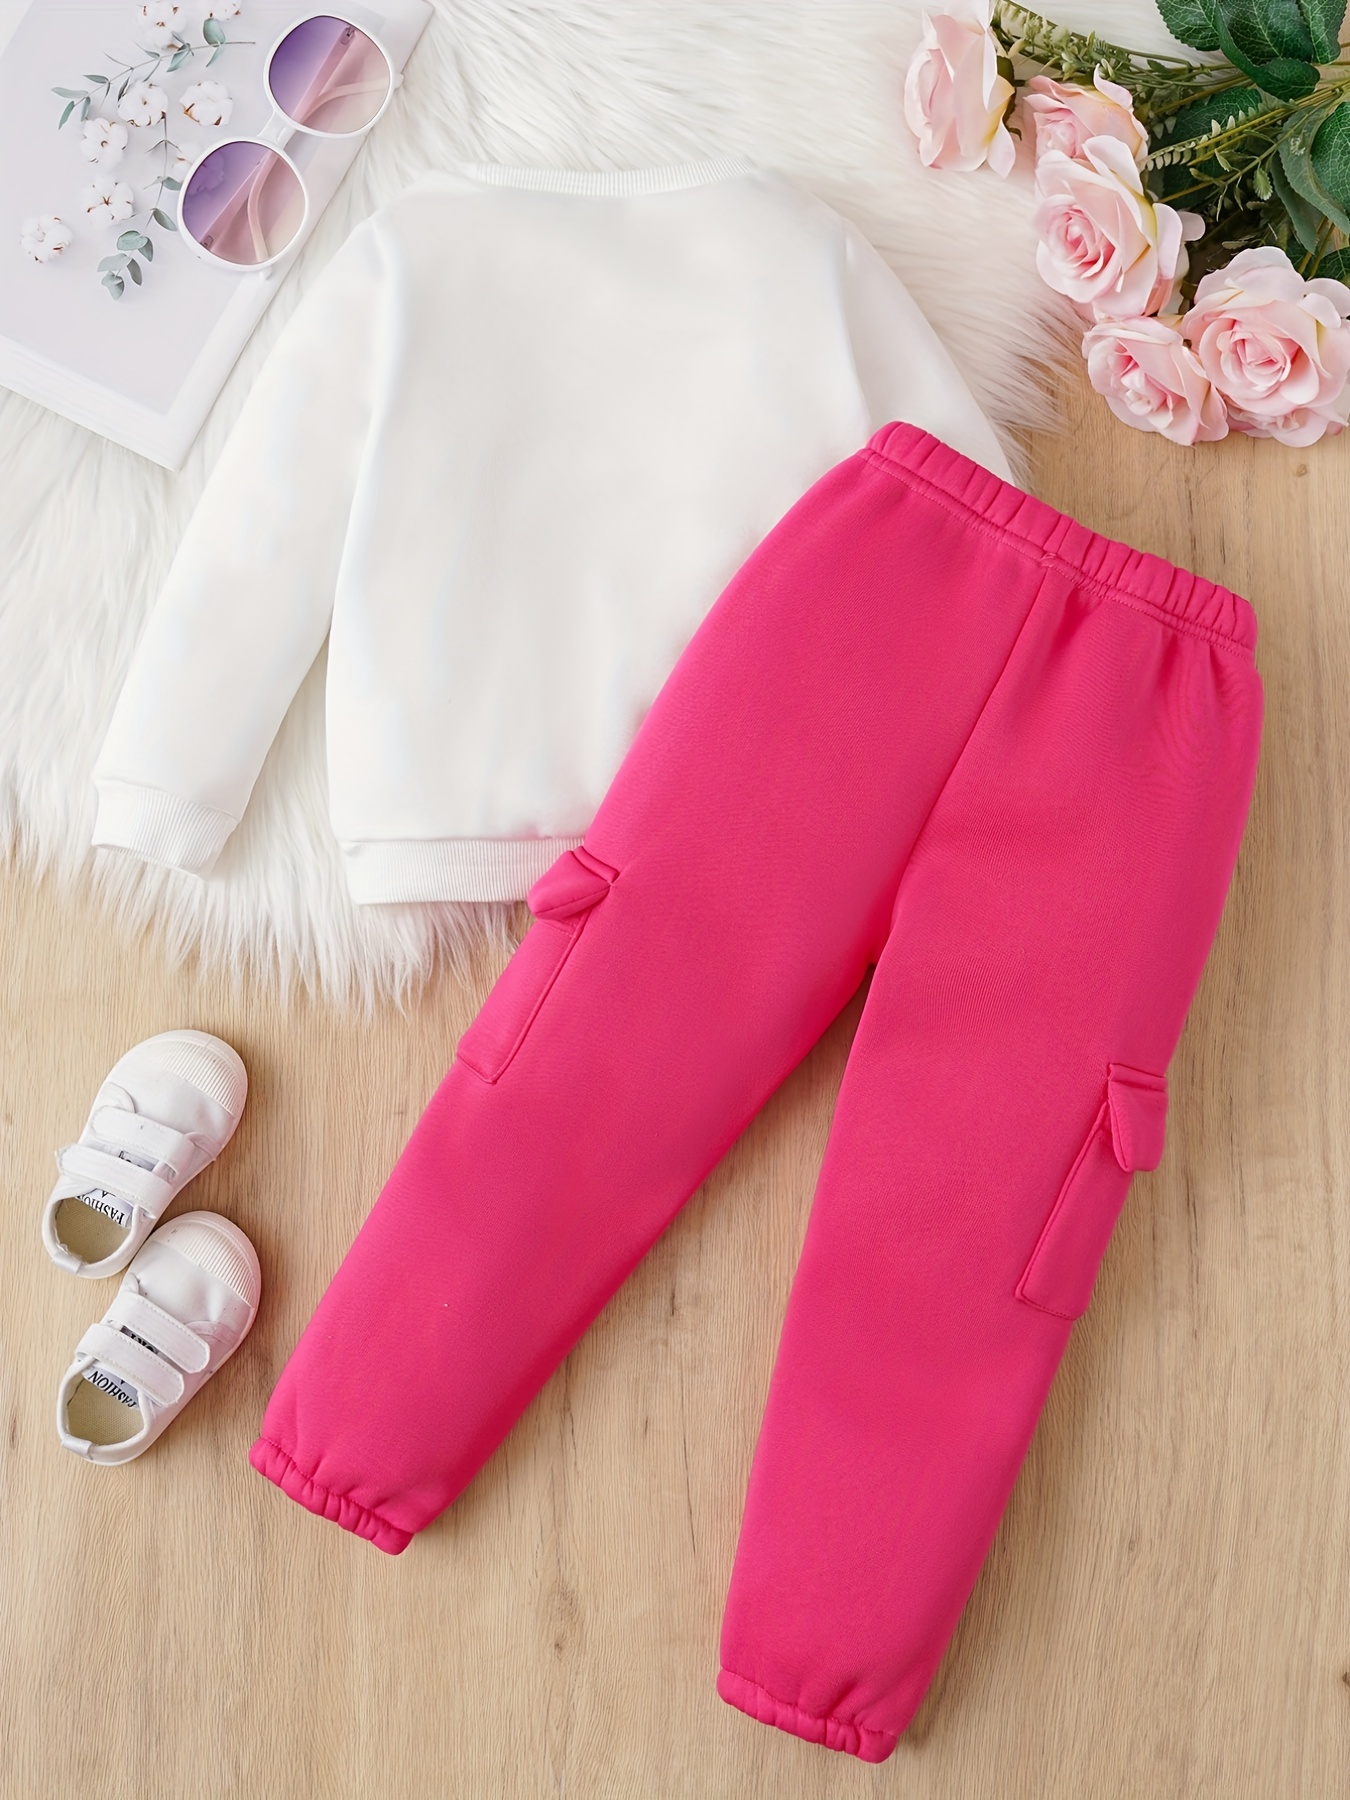 Girls Pants For Letter Pattern Kids Pants Newest Children Trousers